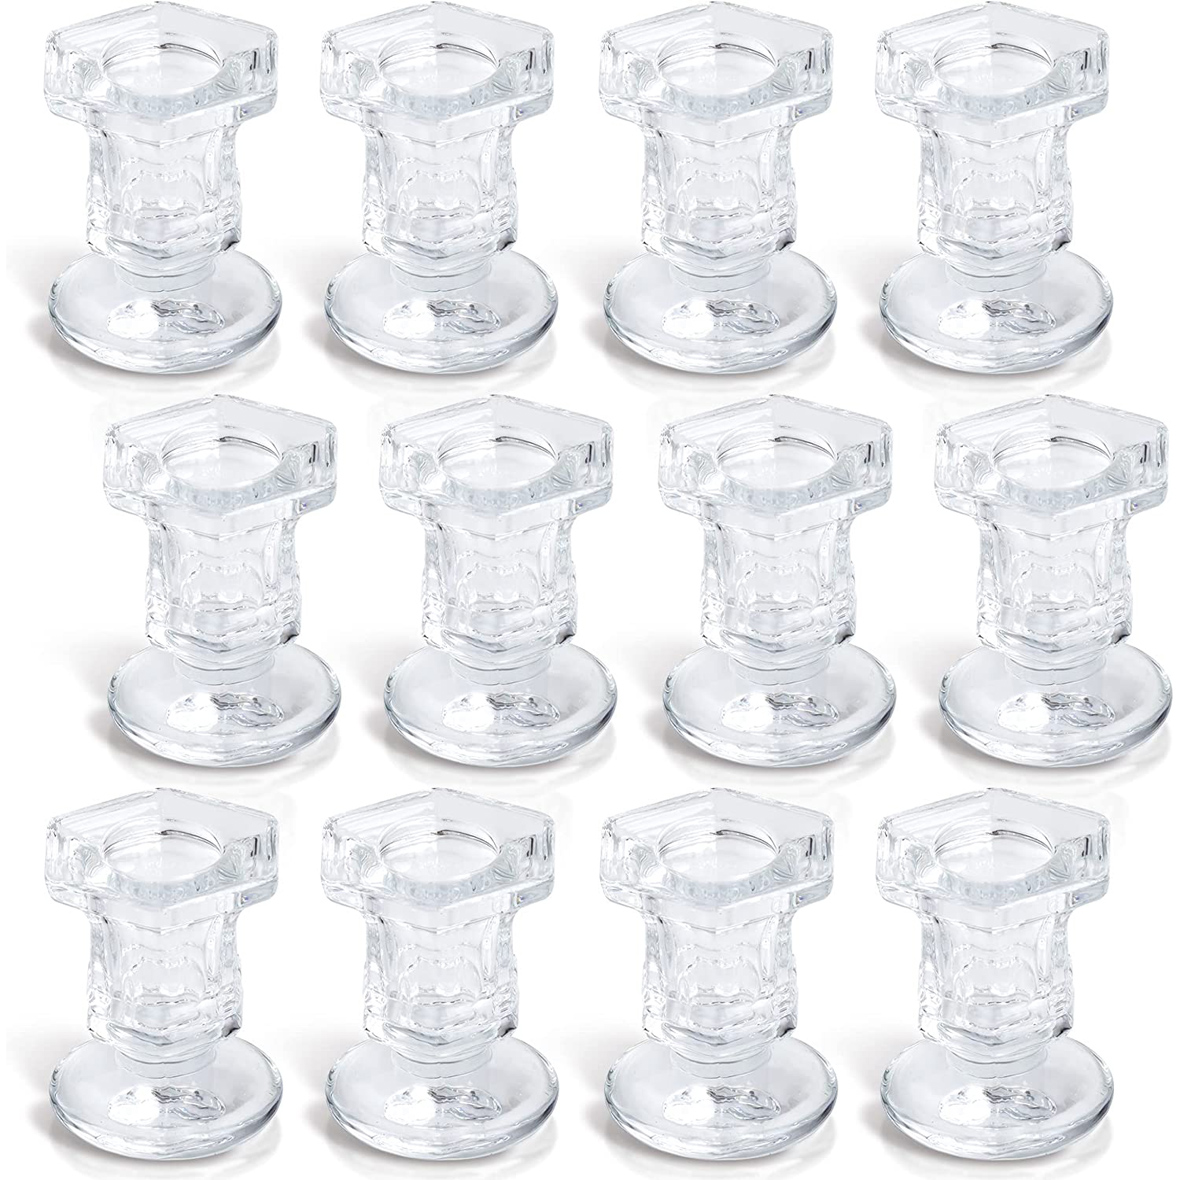 Yongmao Glass Candlestick Holders Set of 12, 2.5" H Taper Candle Holders, Clear Glass Candle Holders for Home Decor, Wedding, Anniversary, Festival, Party Centerpiece